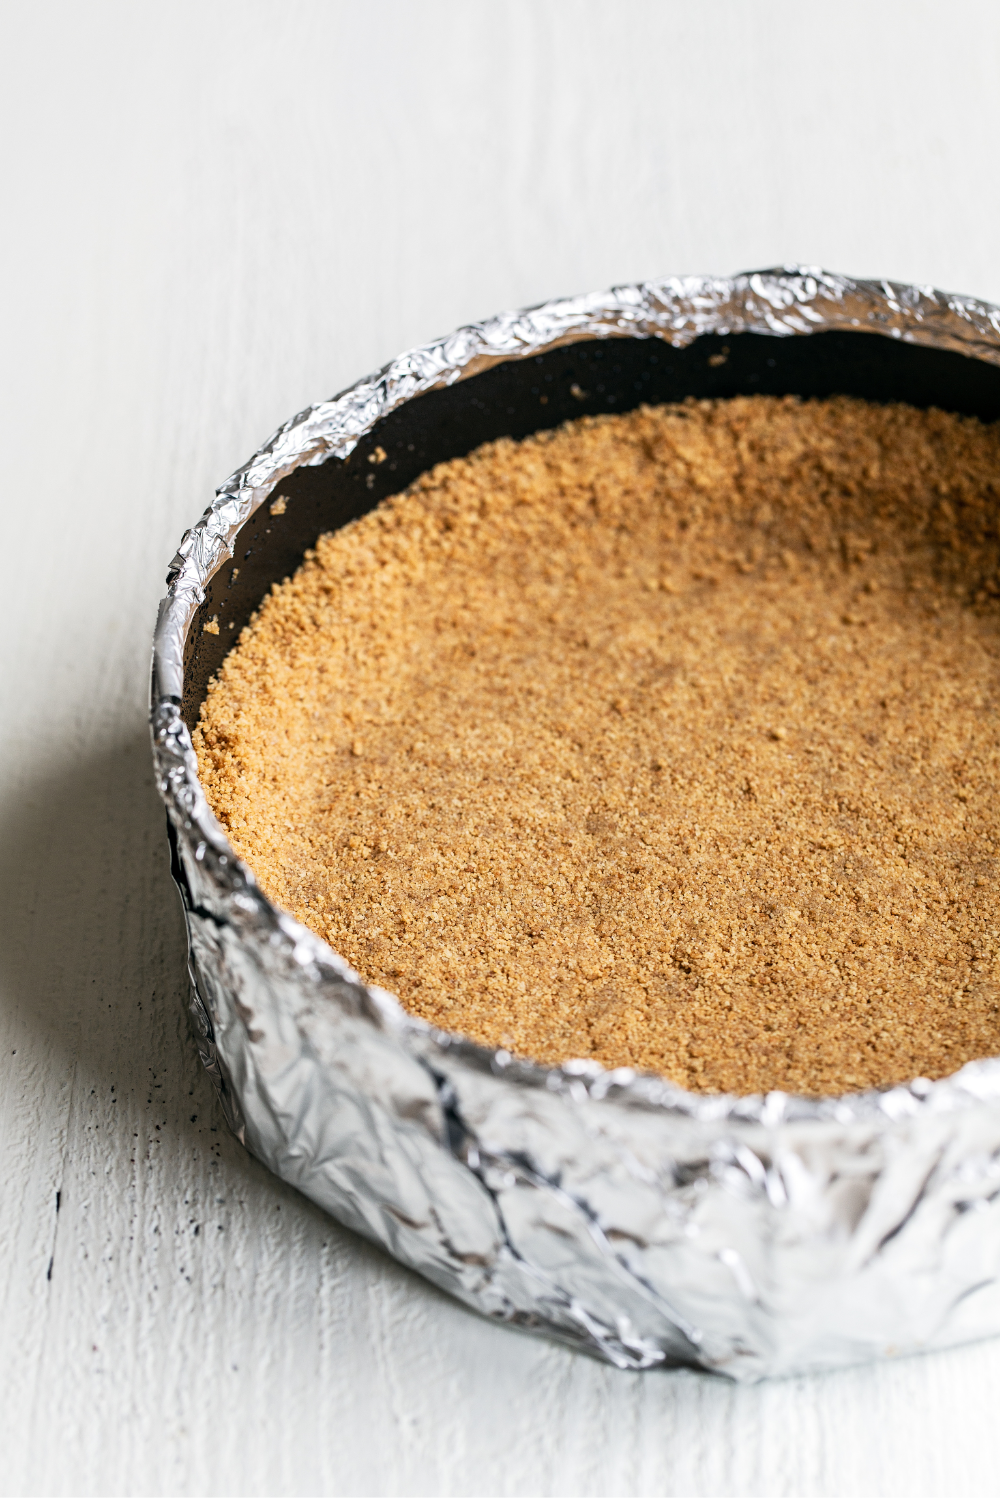 the graham cracker crust in its pan, ready to be filled with cheesecake.